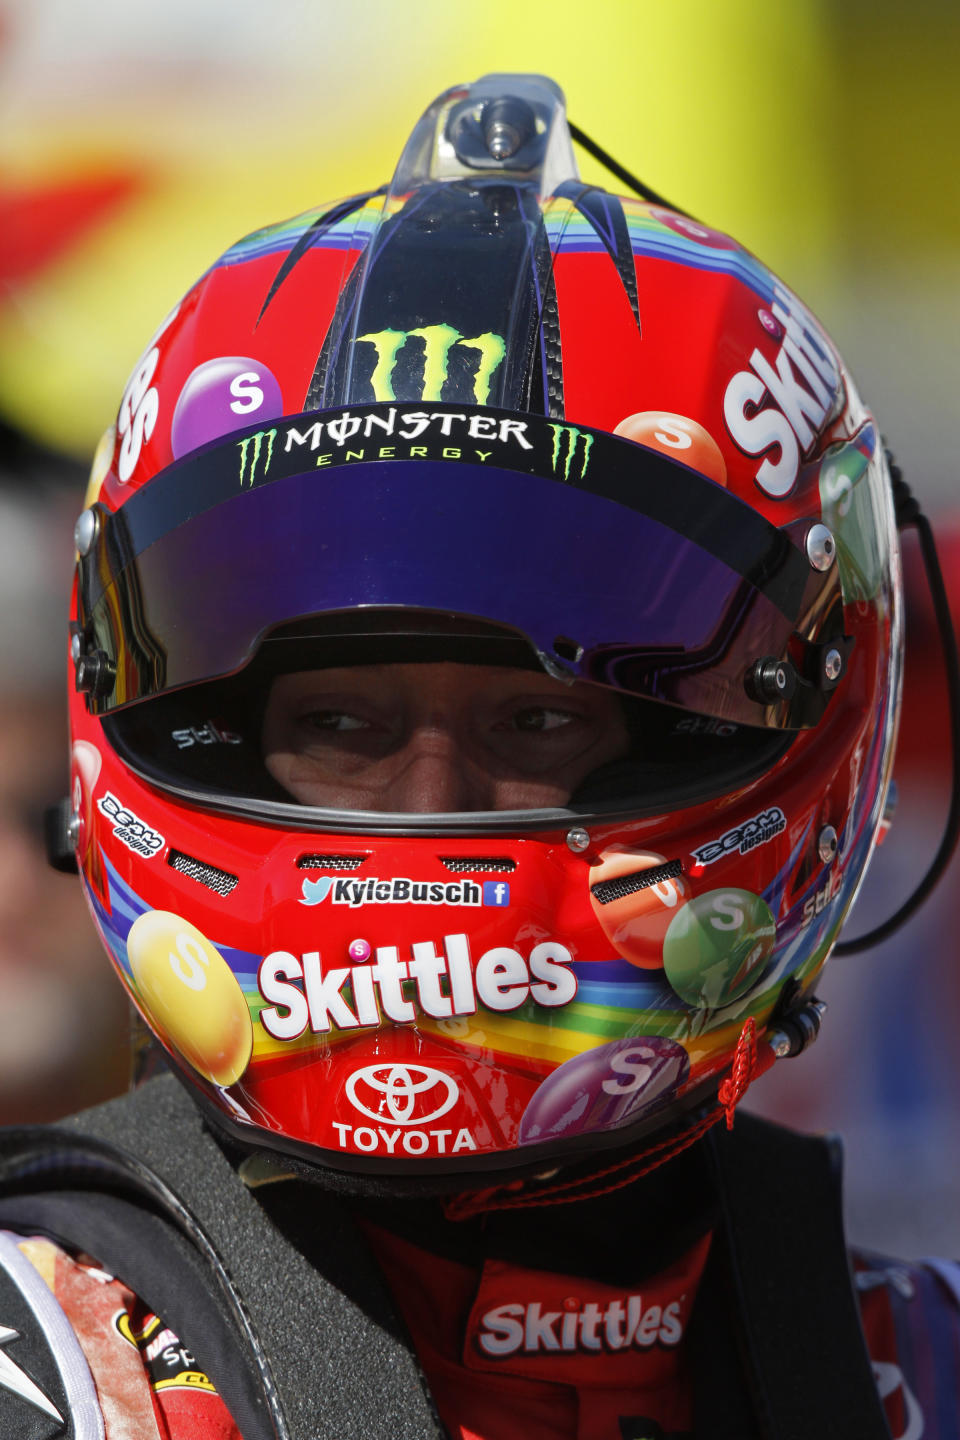 Driver Kyle Busch (18) waits during practice for the NASCAR Sprint Cup series auto race at Bristol Motor Speedway on Friday, March 14, 2014, in Bristol, Tenn. (AP Photo/Wade Payne)